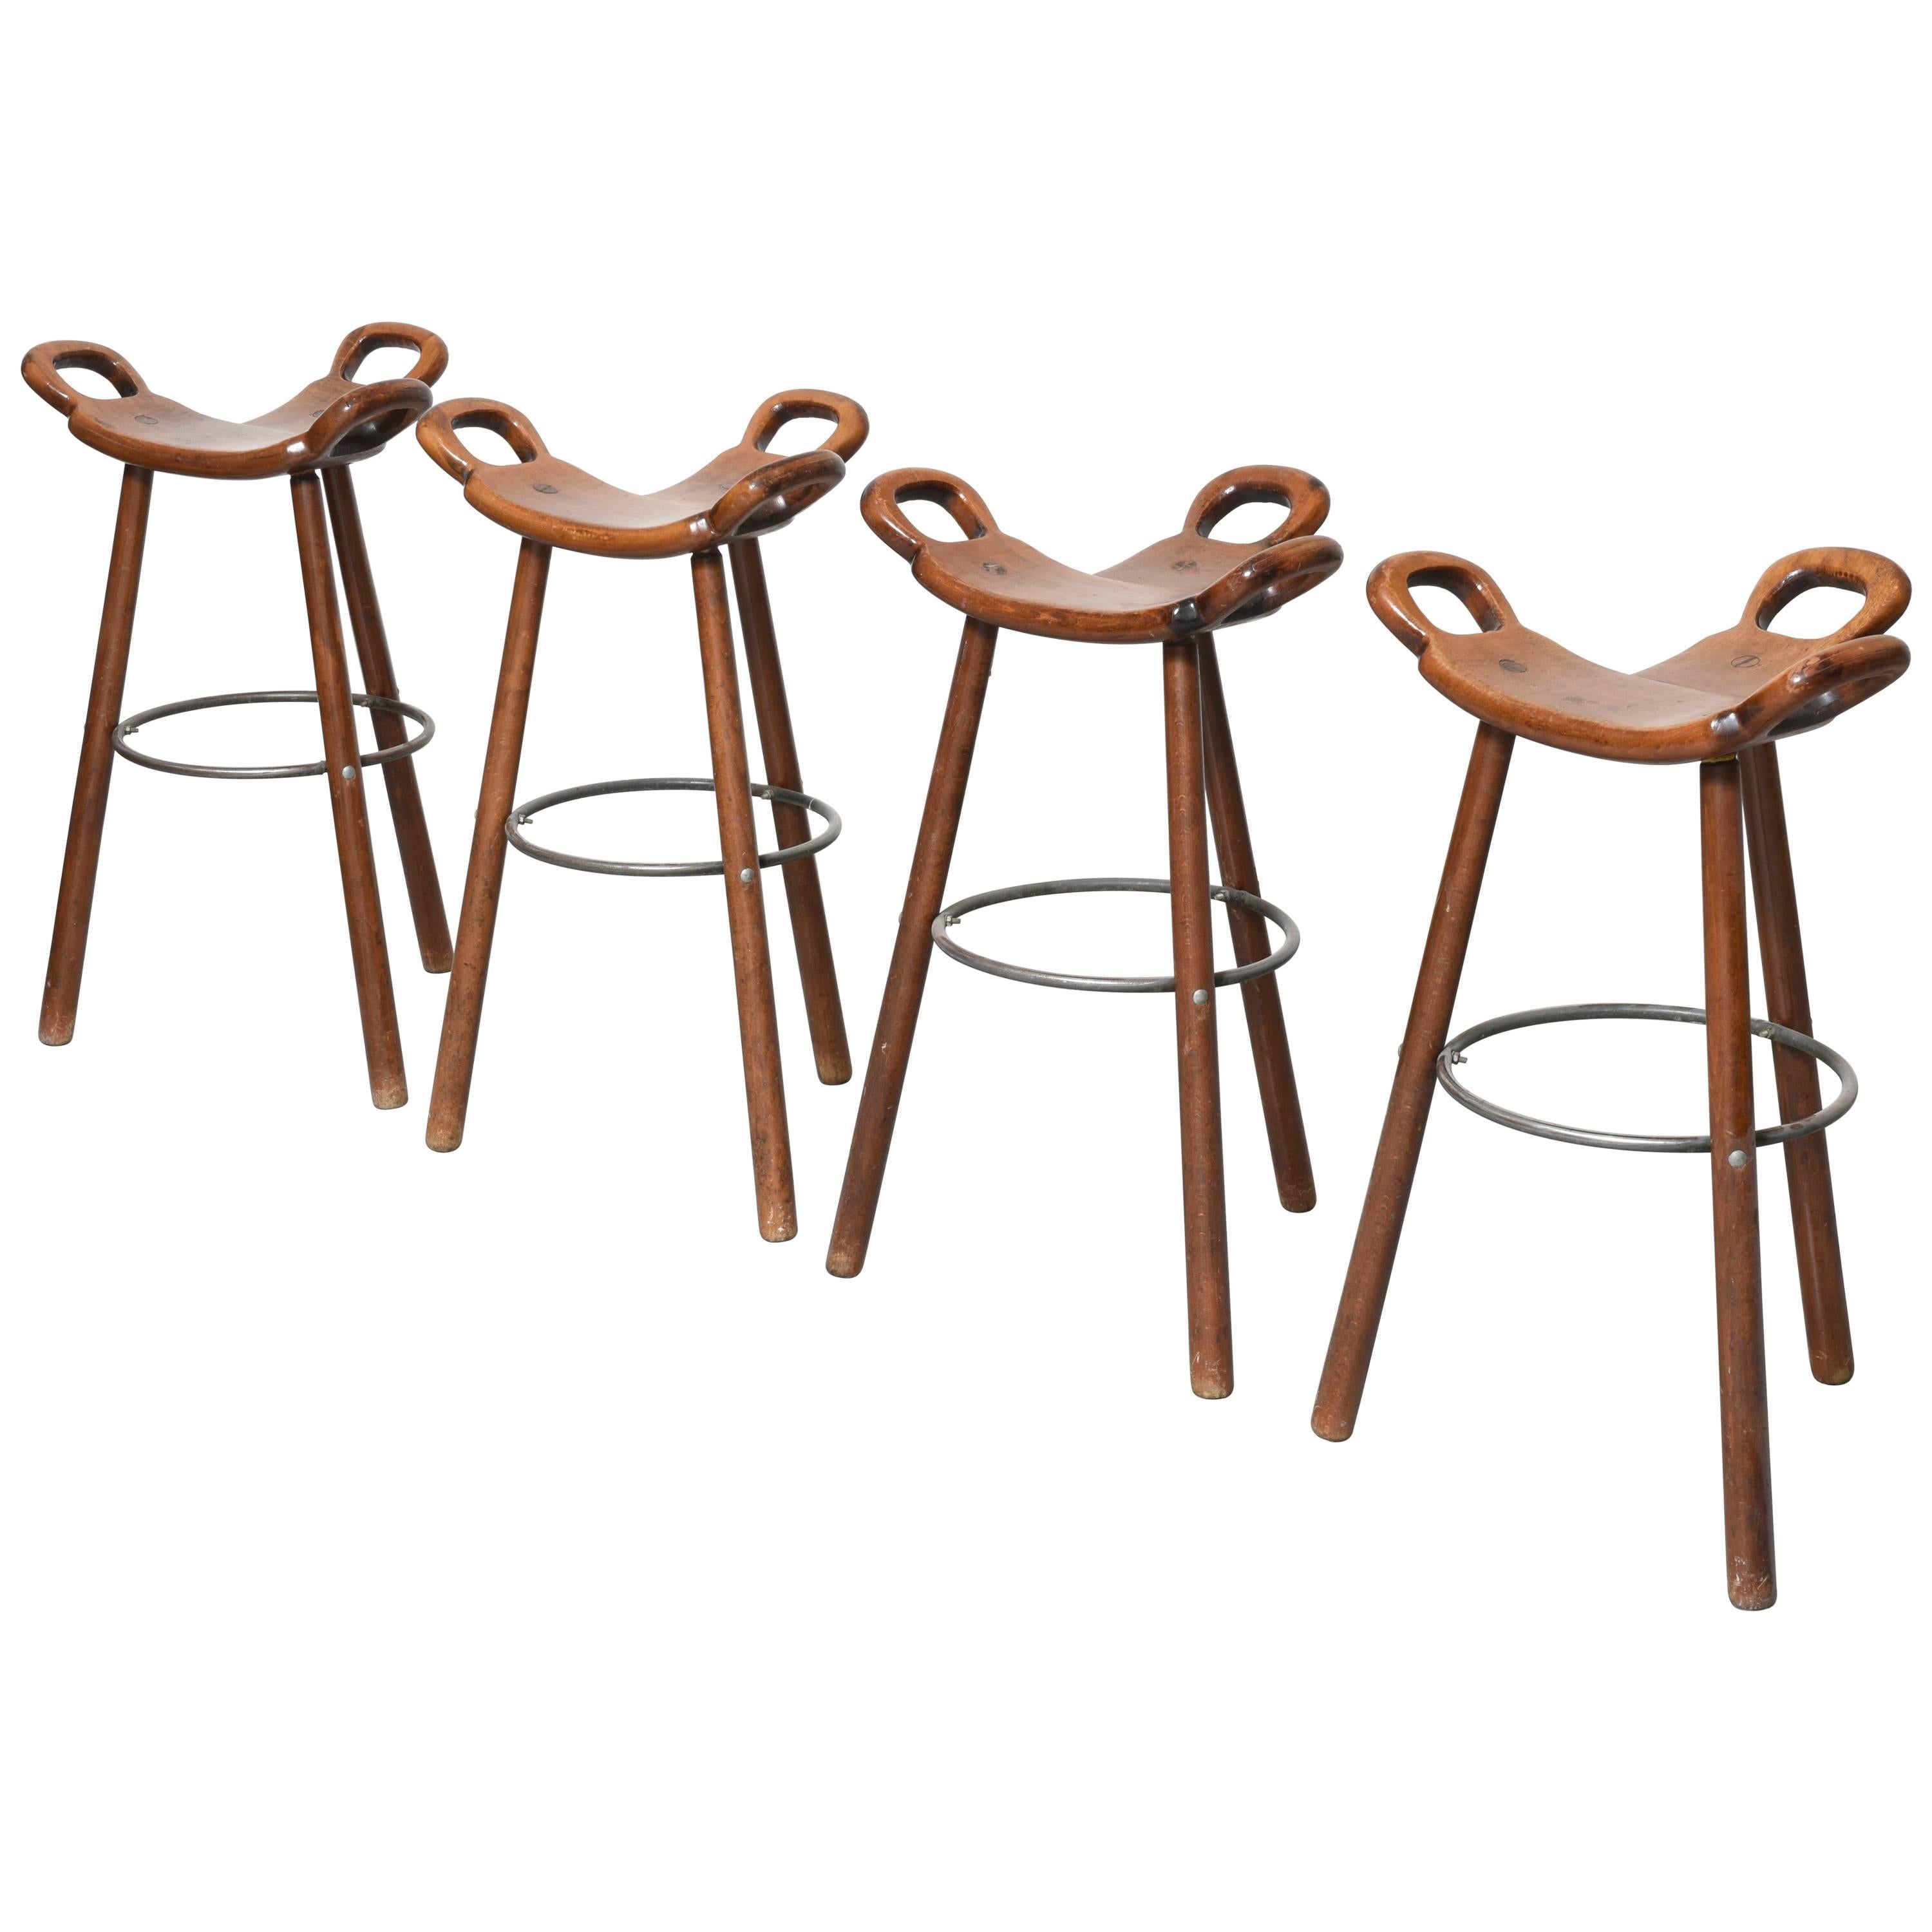 Set of Four Brutalist "Marbella" Bar Stools by Sergio Rodrigues Spain, 1970s